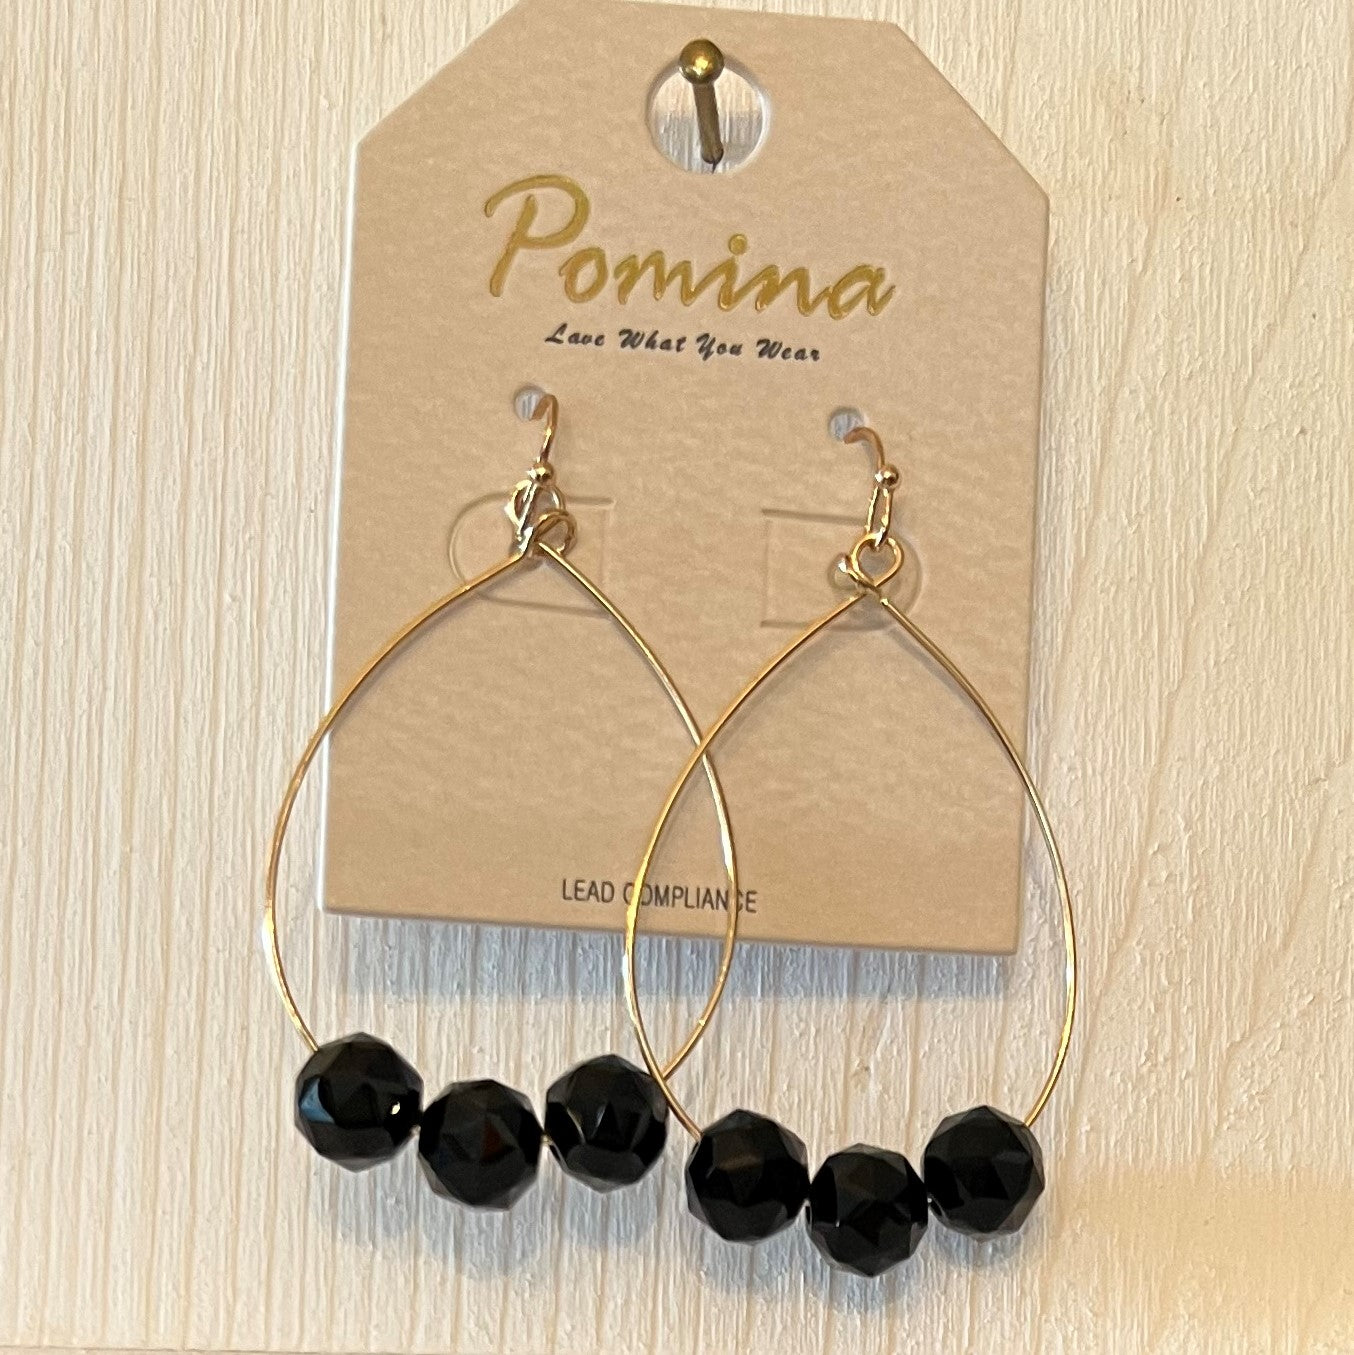 These are such beautiful teardrop earrings with crystal beads! The colors are neutral to go with so much. The crystal beads give them some extra sparkle. A beautiful pair of earrings!